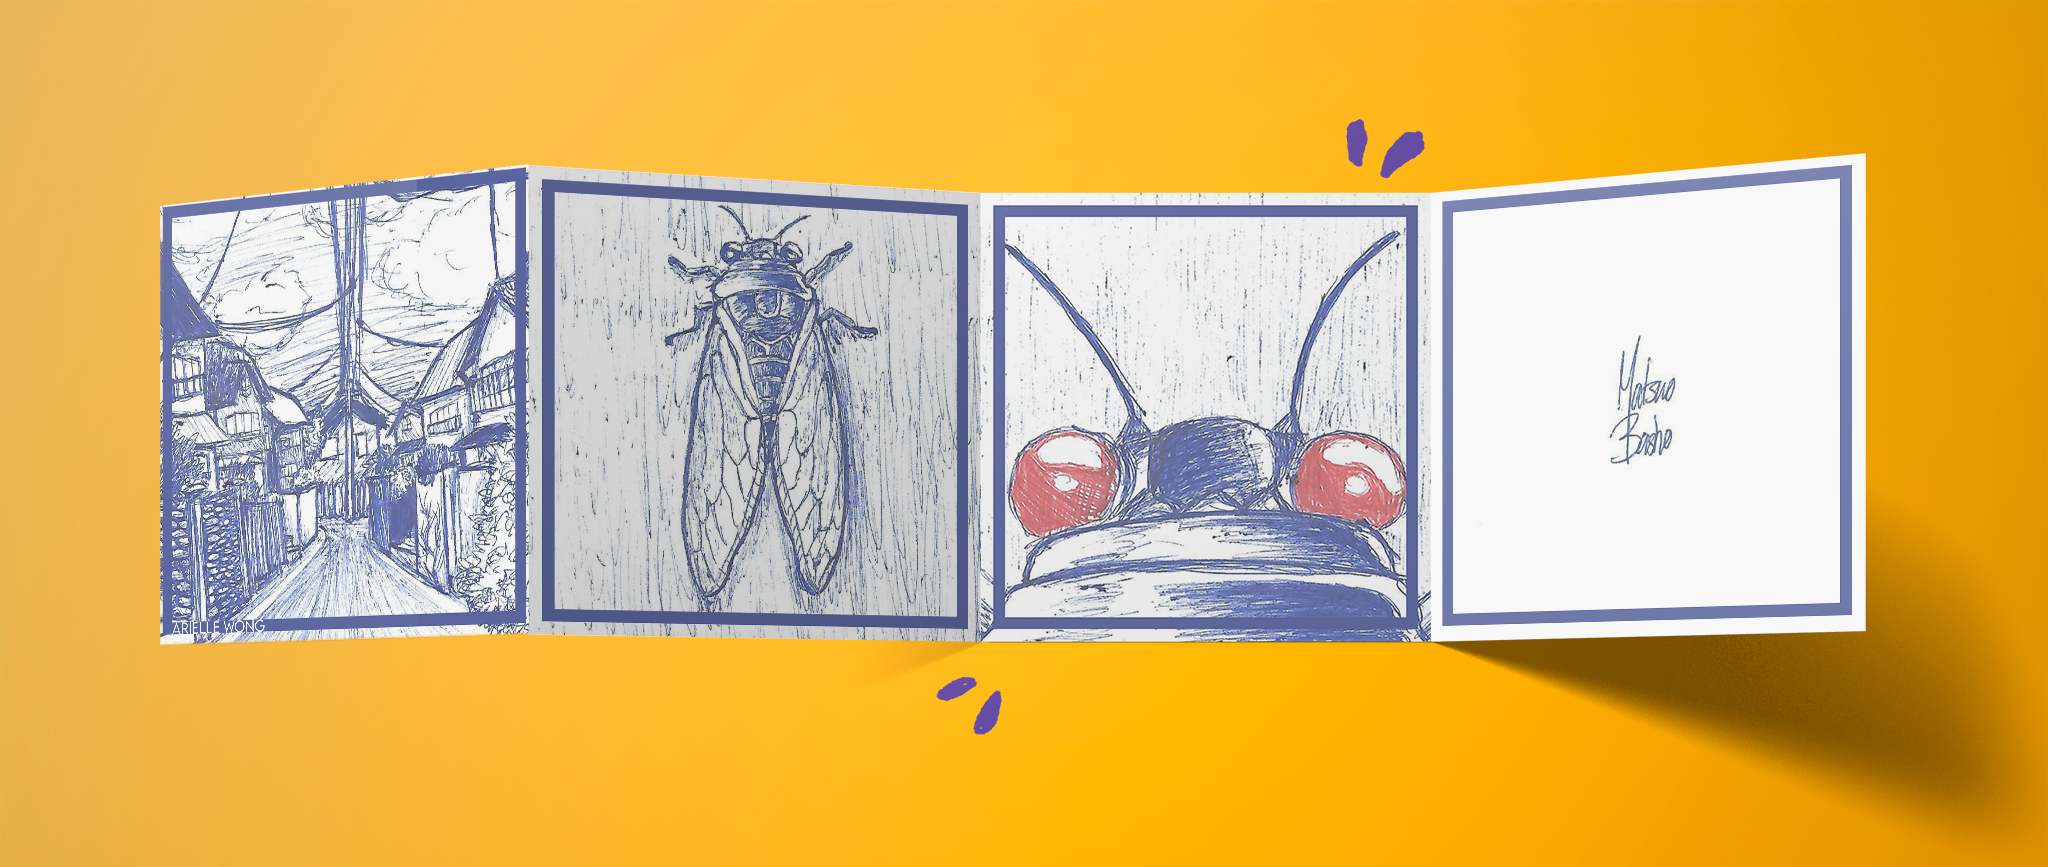 Four square panelled brochure. The first panel depicts a hand-drawn Japanese town. The second panel is a drawing of a cicada. The third panel is a close-up of the cicada's face. The last panel says 